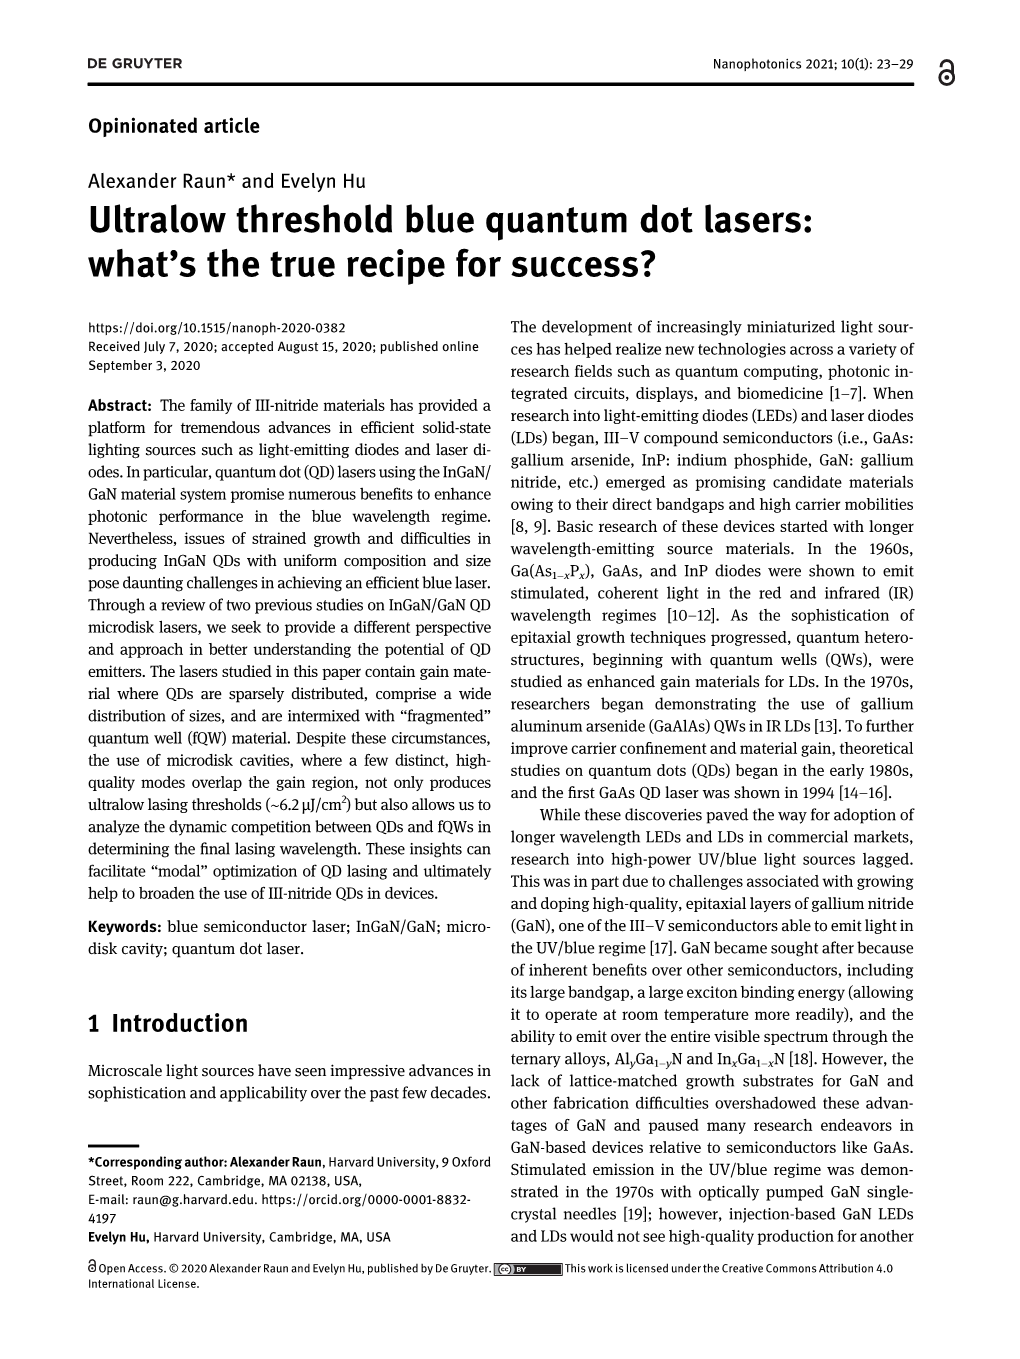 Ultralow Threshold Blue Quantum Dot Lasers: What's the True Recipe For